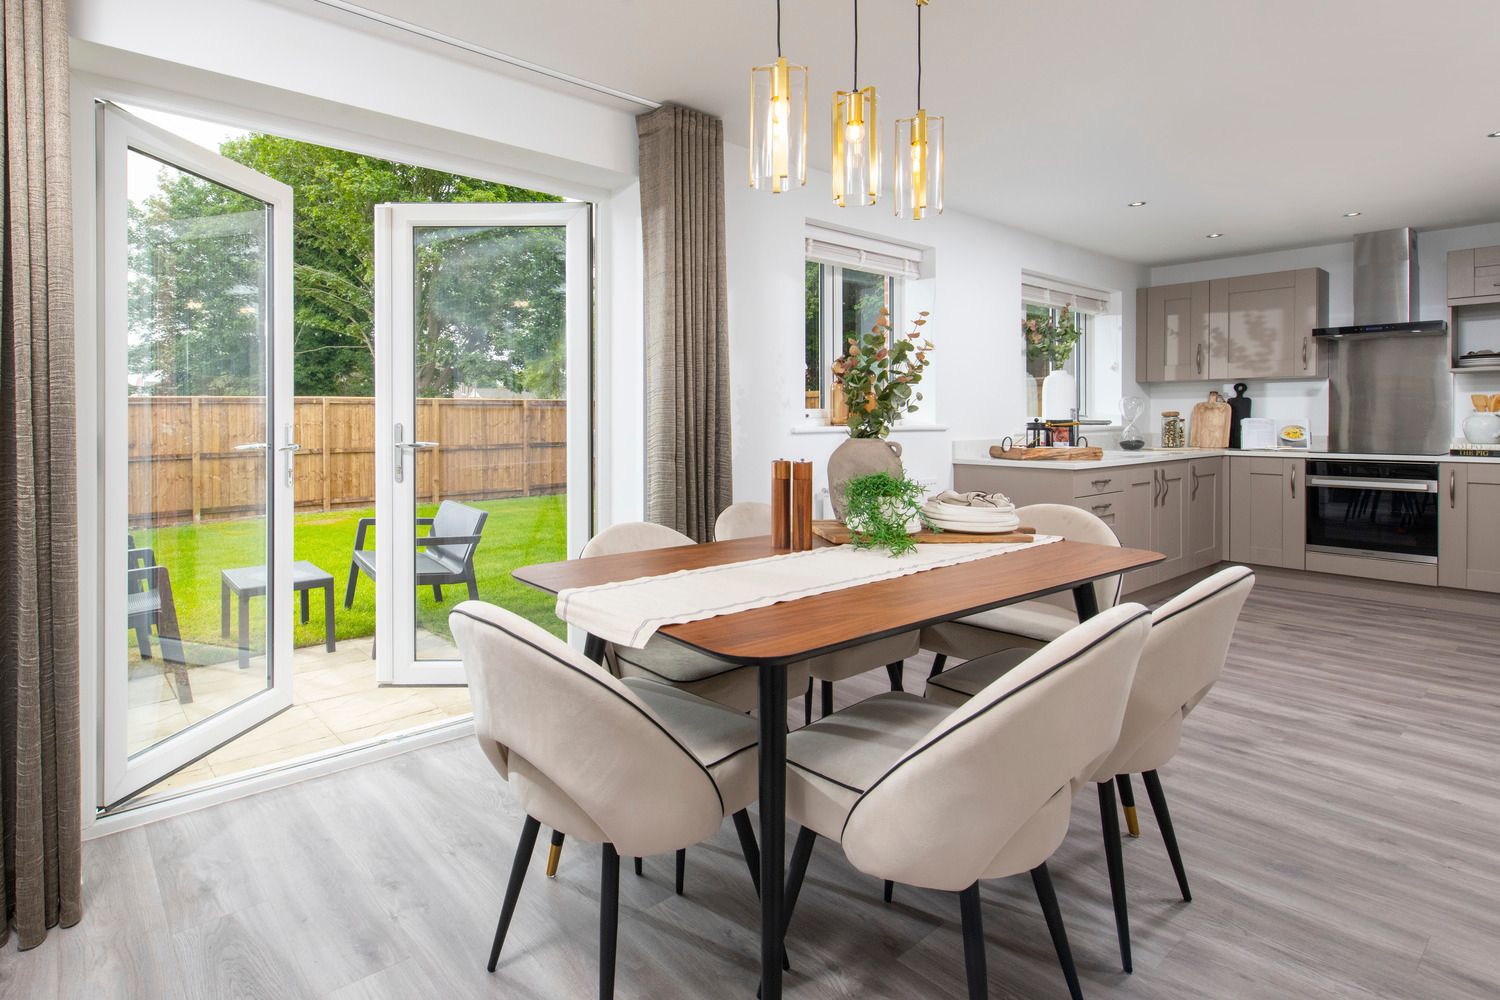 New show home opens at Strawberry Fields, Rothwell